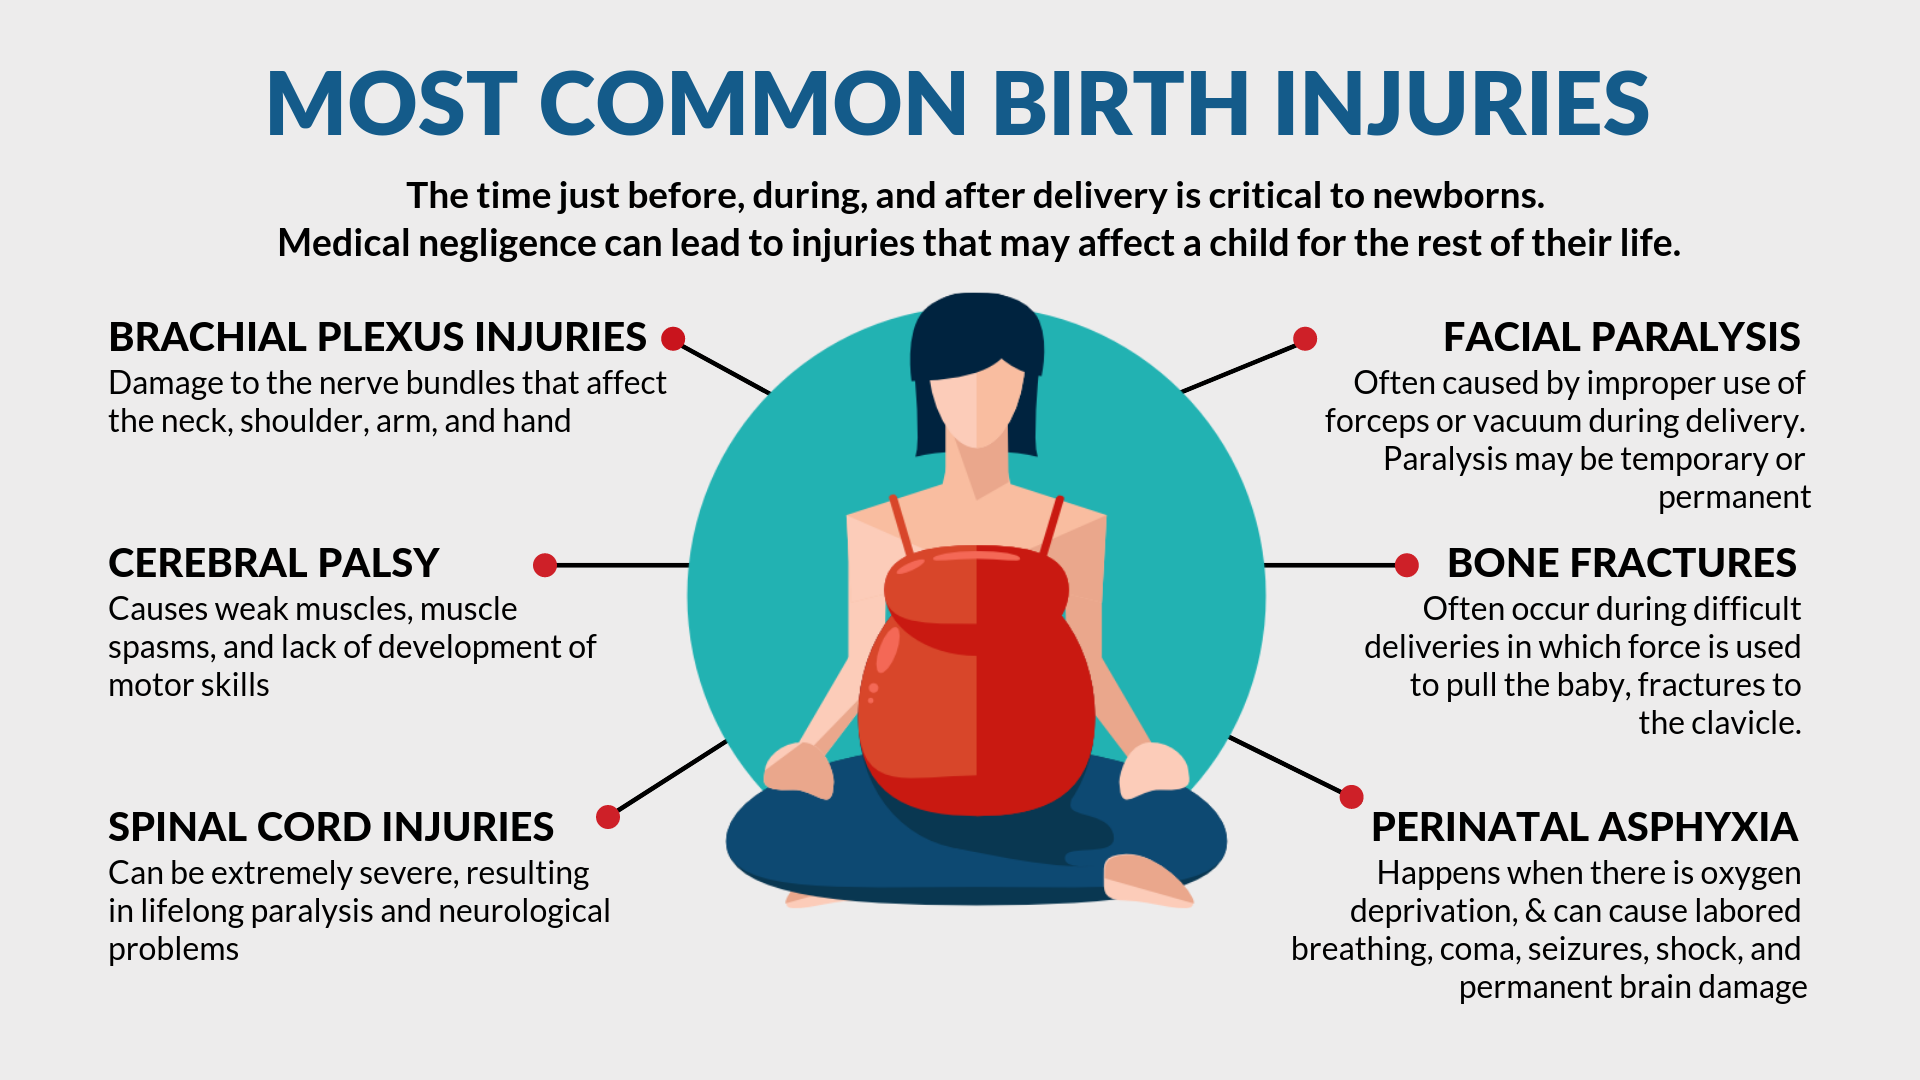 Baltimore Birth Injury Lawyers Discuss the Most Common Types of Birth Injuries